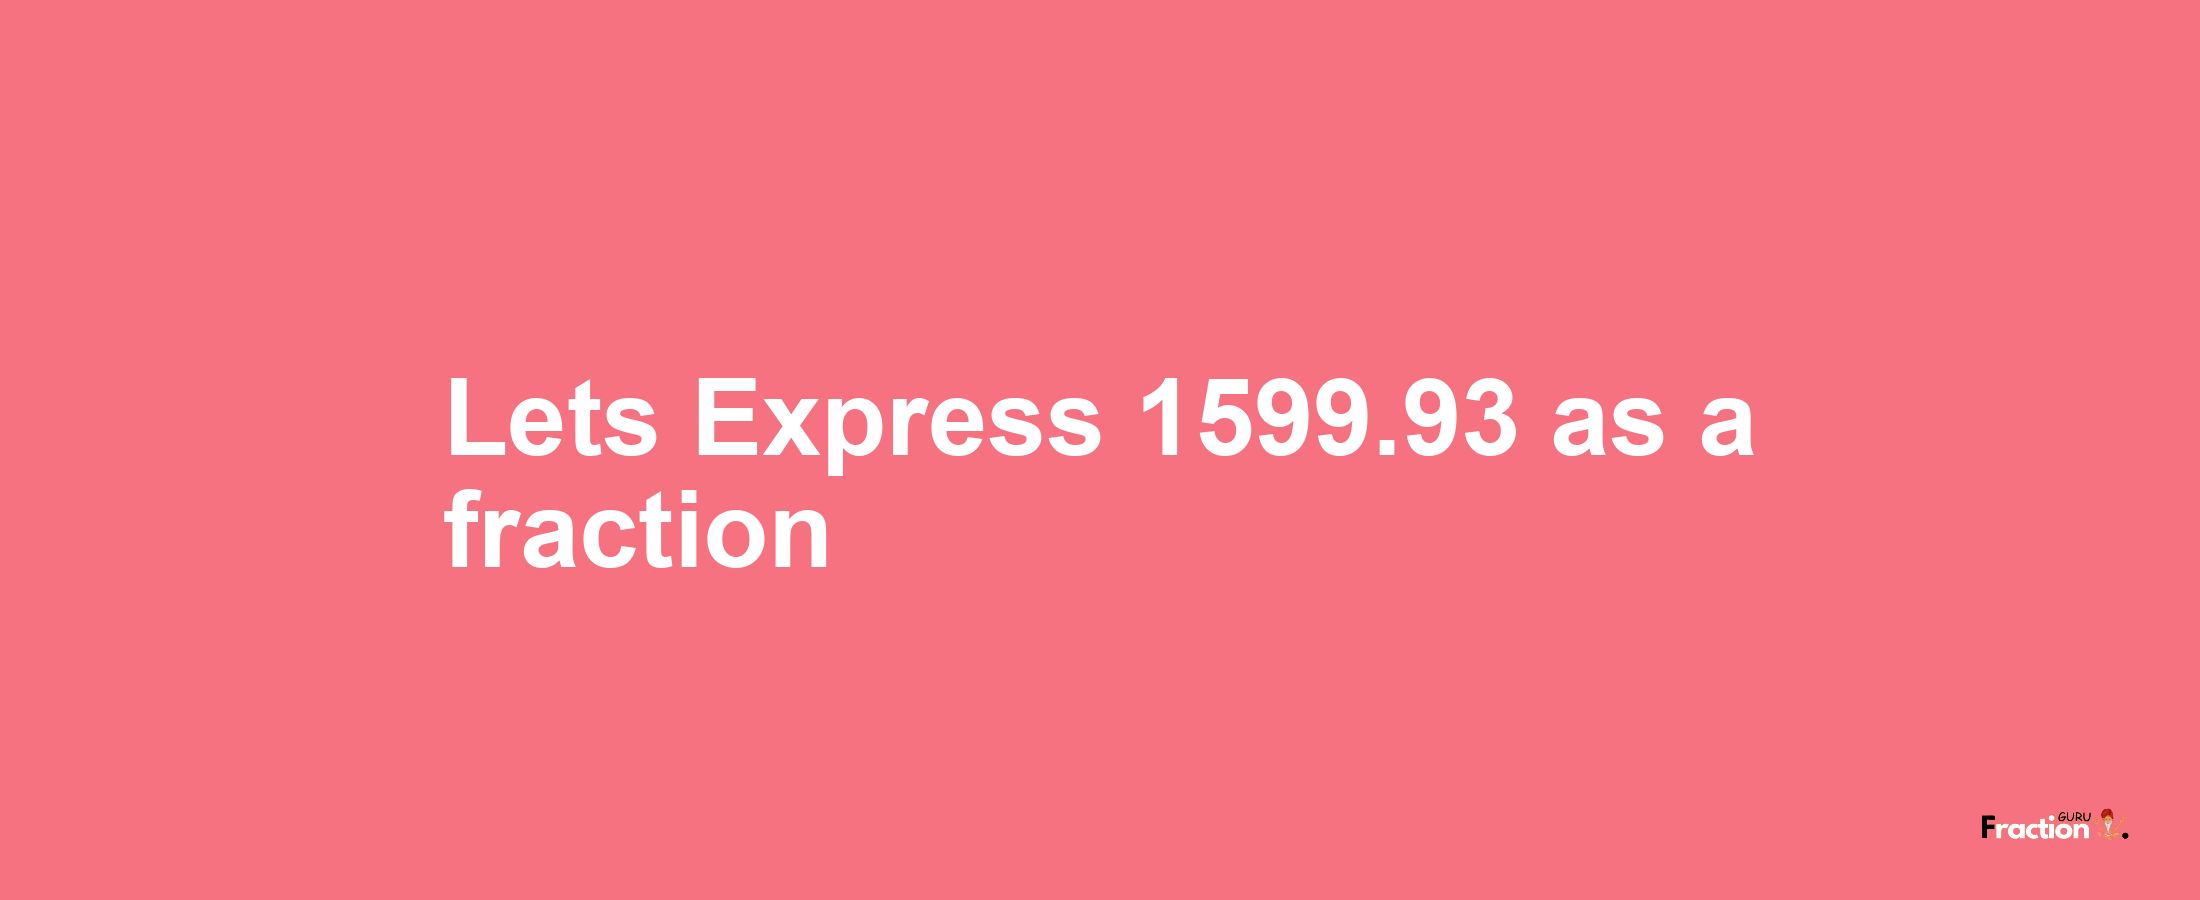 Lets Express 1599.93 as afraction